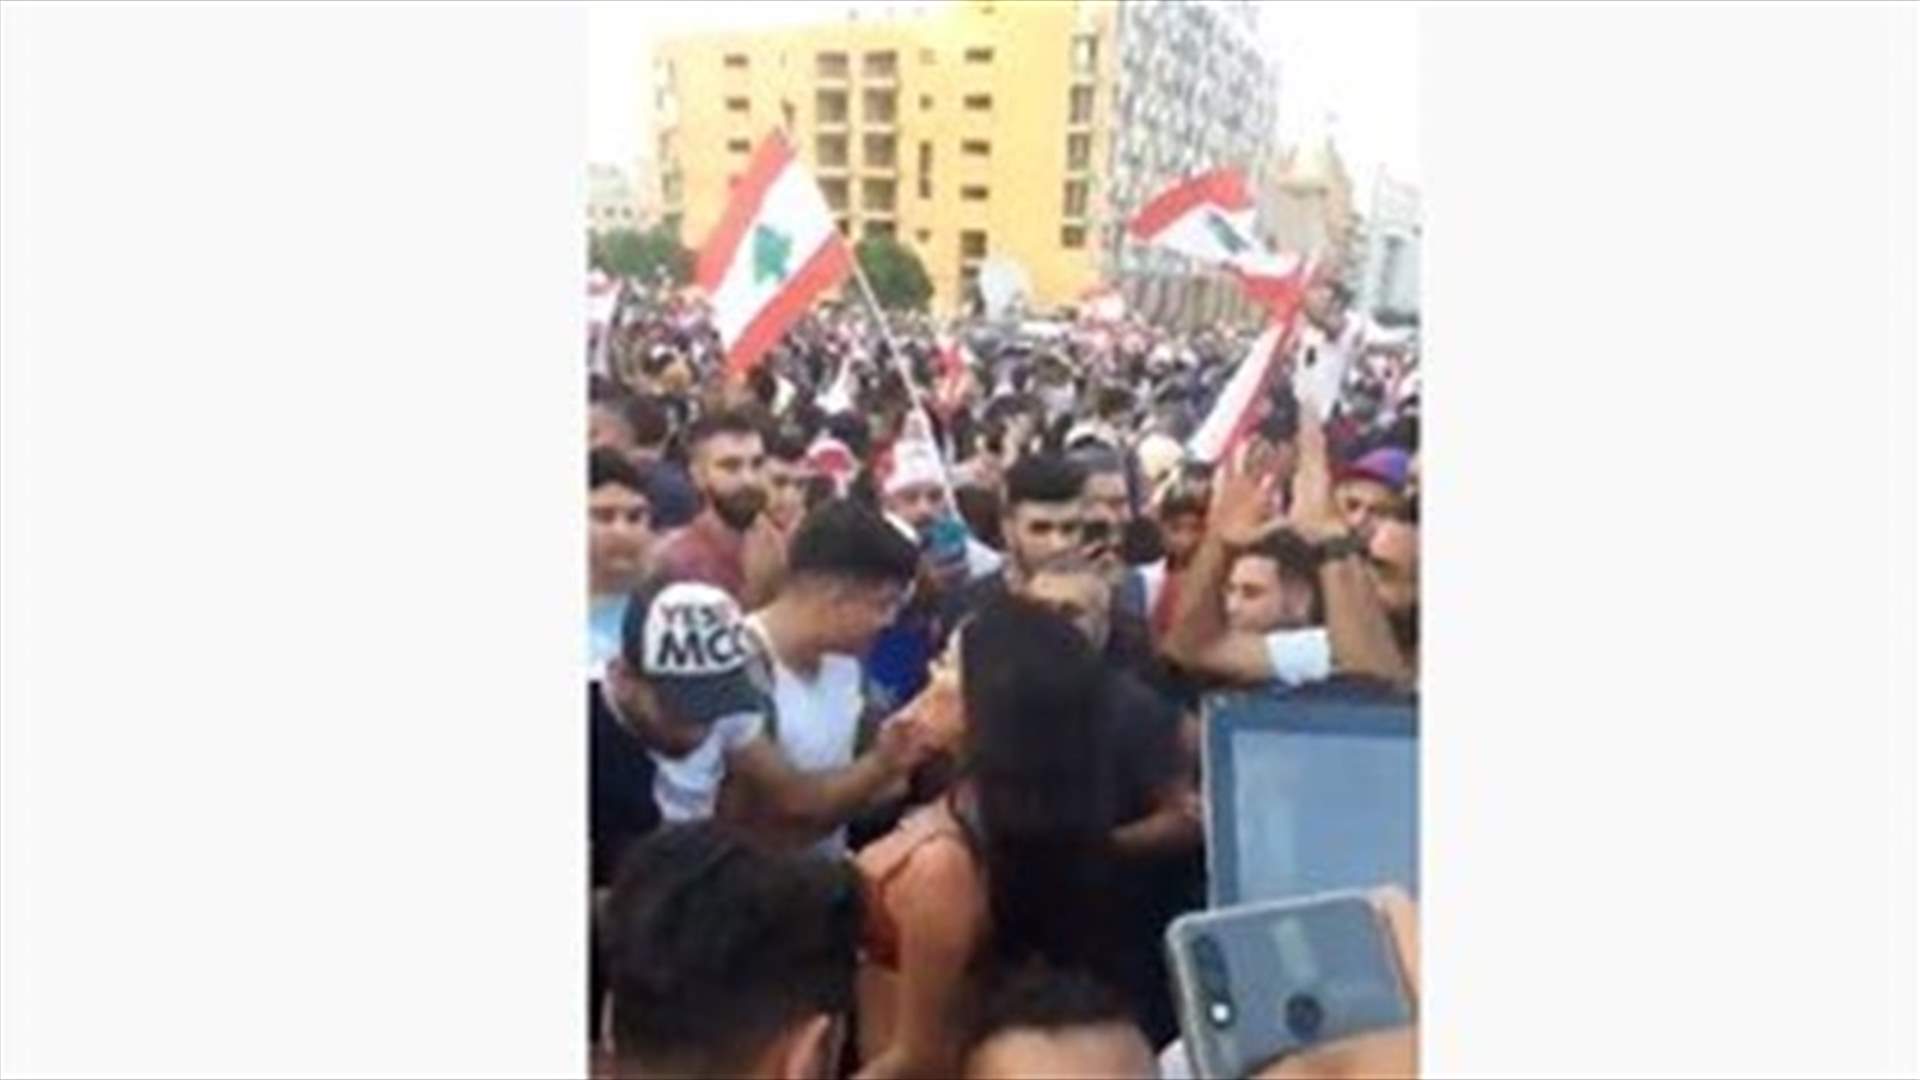 Belly dancer dances among protesters in Beirut downtown-[VIDEO]